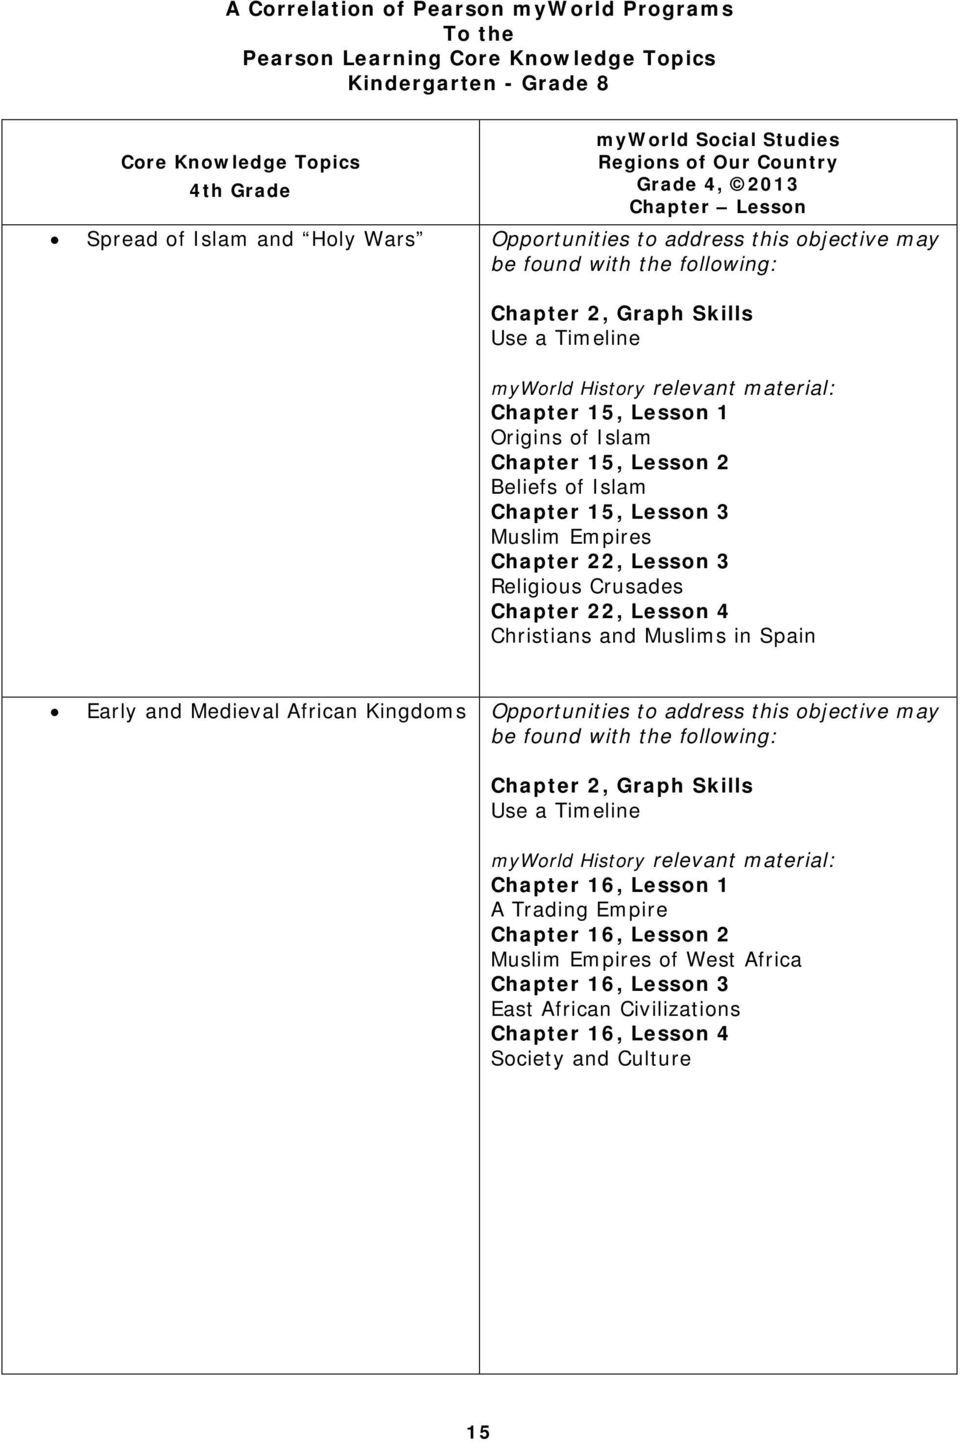 Chapter 22, Lesson 4 Christians and Muslims in Spain Early and Medieval African Kingdoms Opportunities to address this objective may Chapter 2, Graph Skills Use a Timeline myworld History